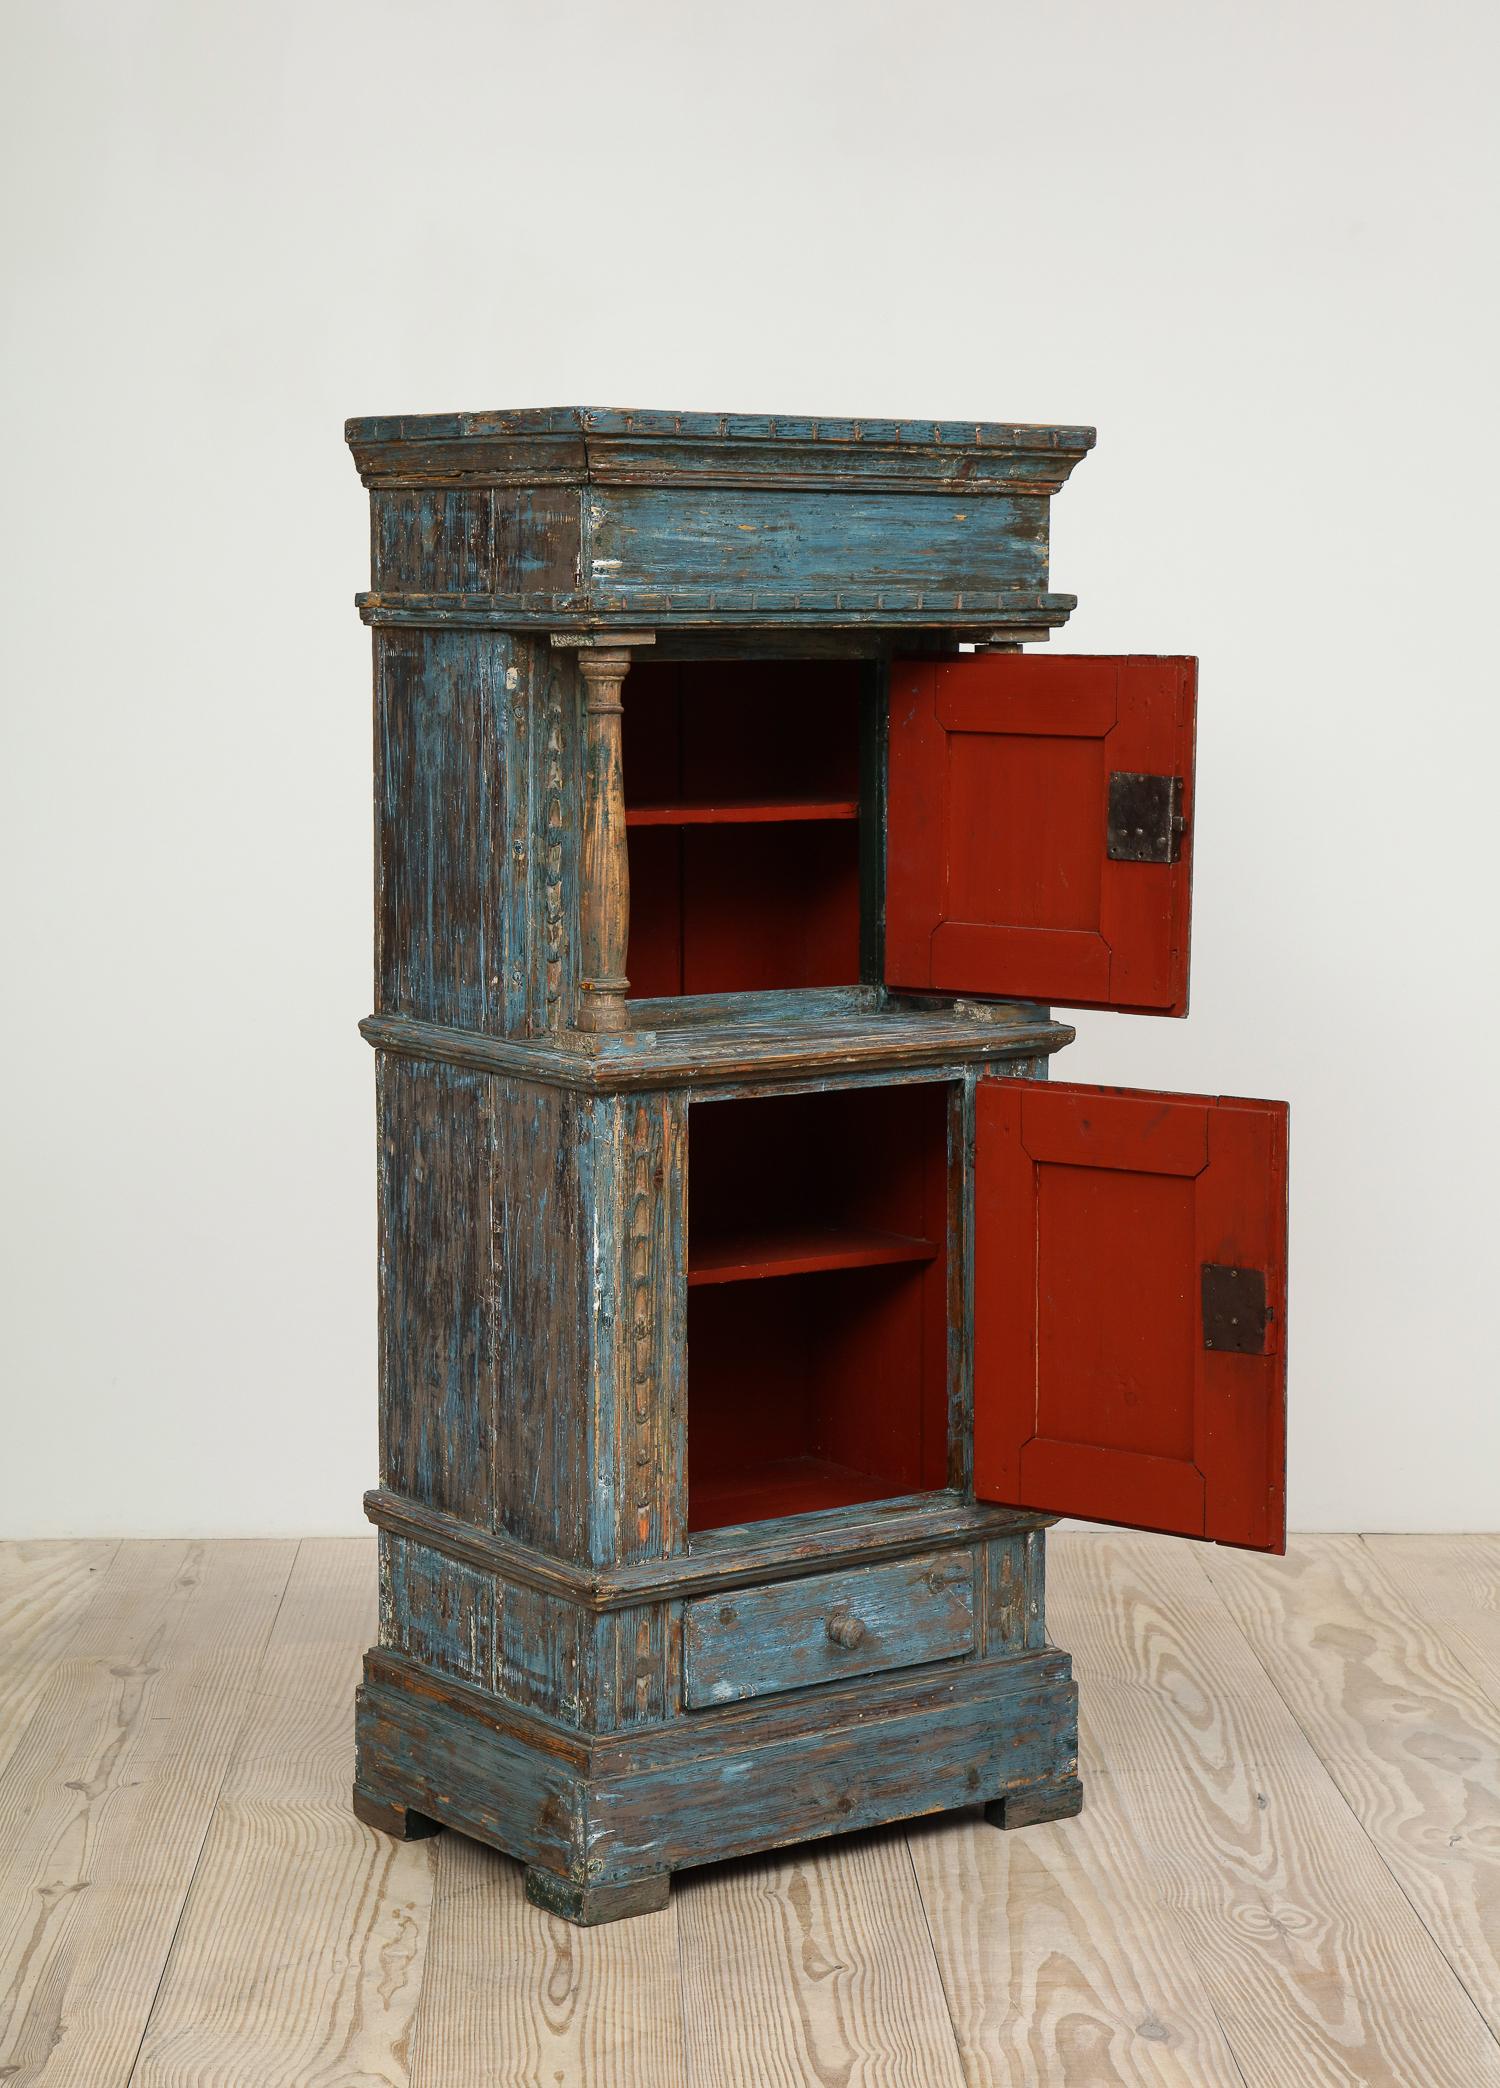 Hand-Carved Renaissance-Revival Danish Cabinet in Blue Paint with Red Interior, ca. 1750